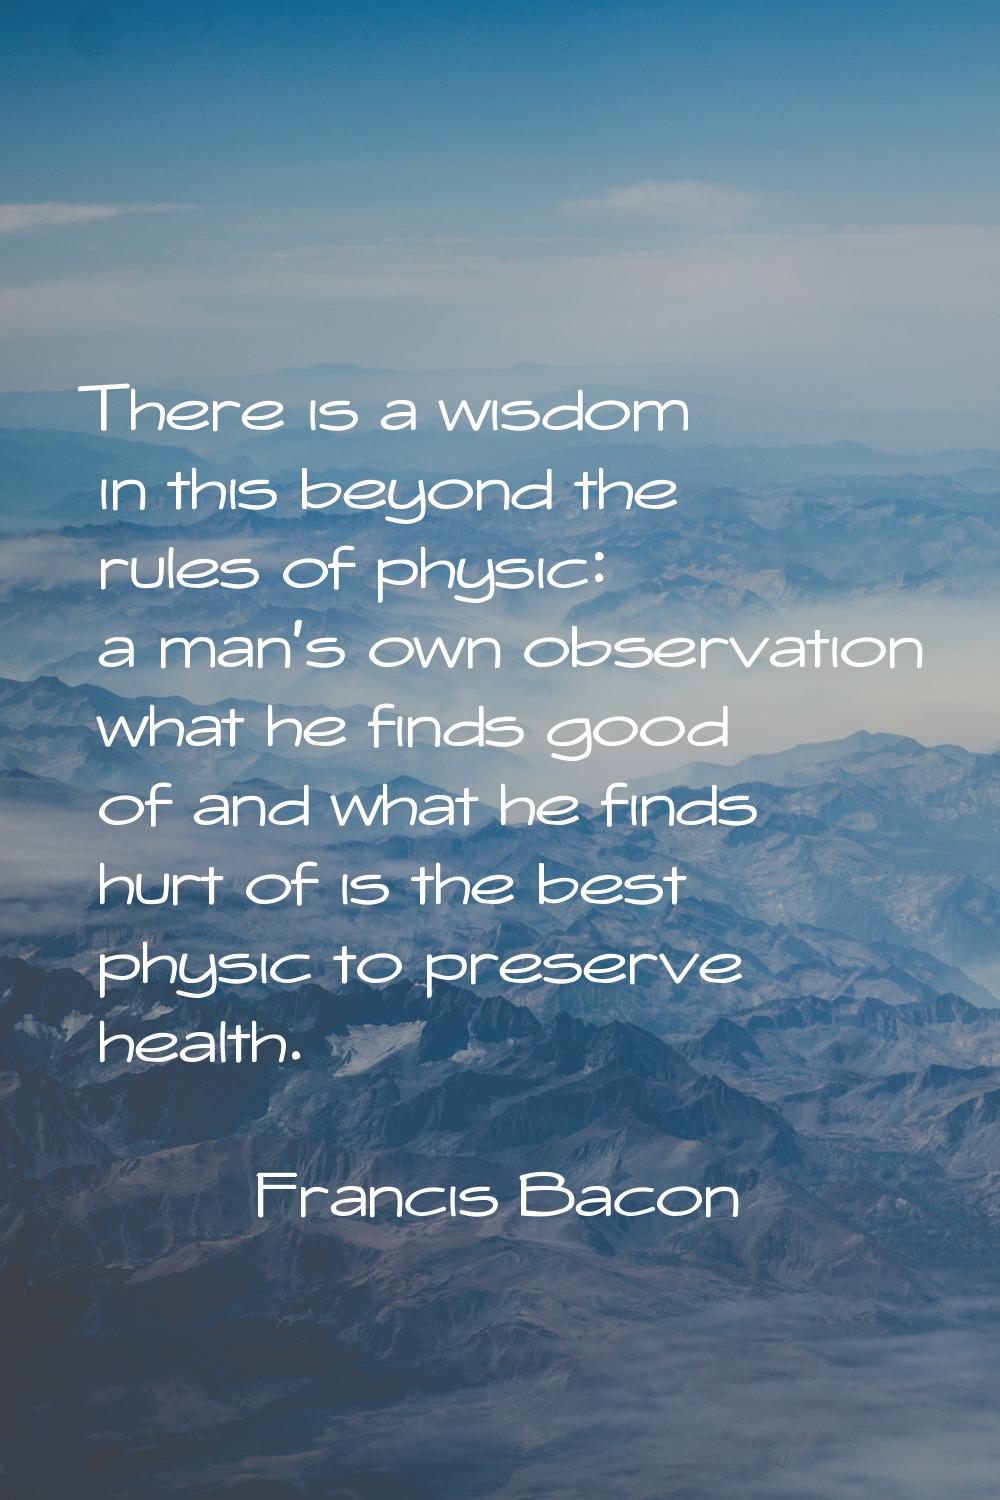 There is a wisdom in this beyond the rules of physic: a man's own observation what he finds good of